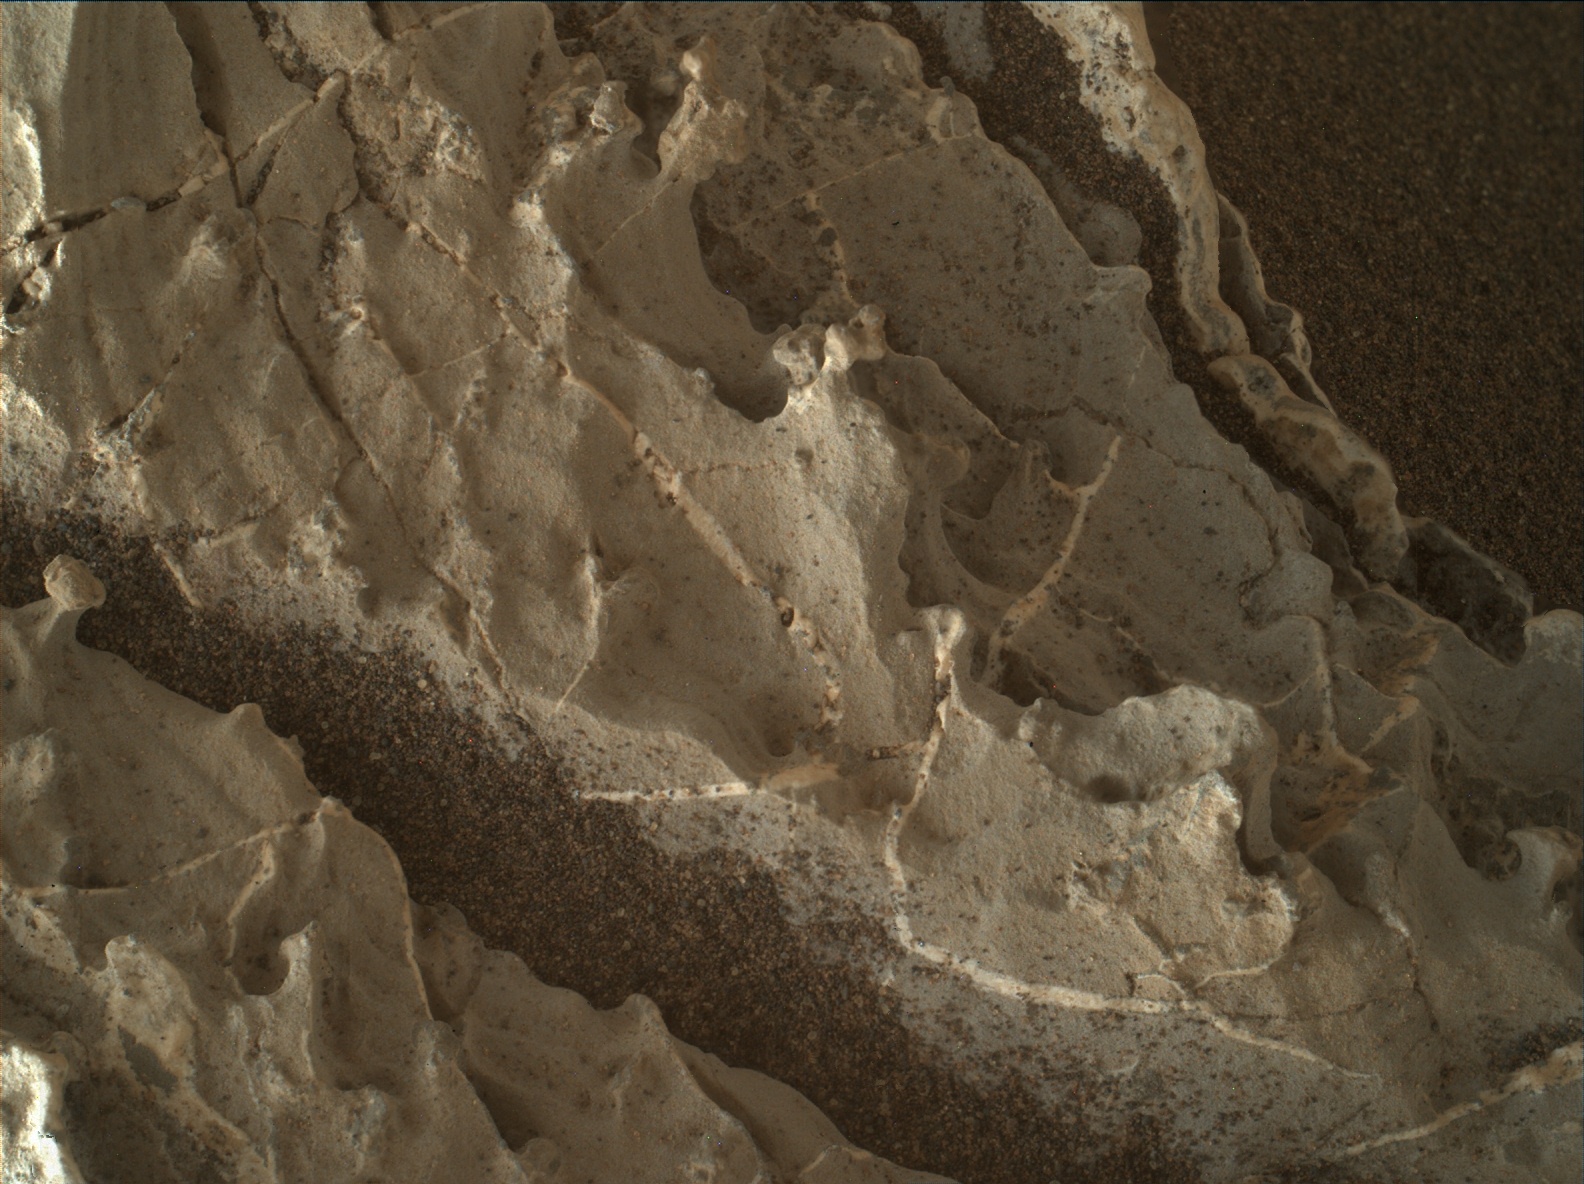 Nasa's Mars rover Curiosity acquired this image using its Mars Hand Lens Imager (MAHLI) on Sol 1964